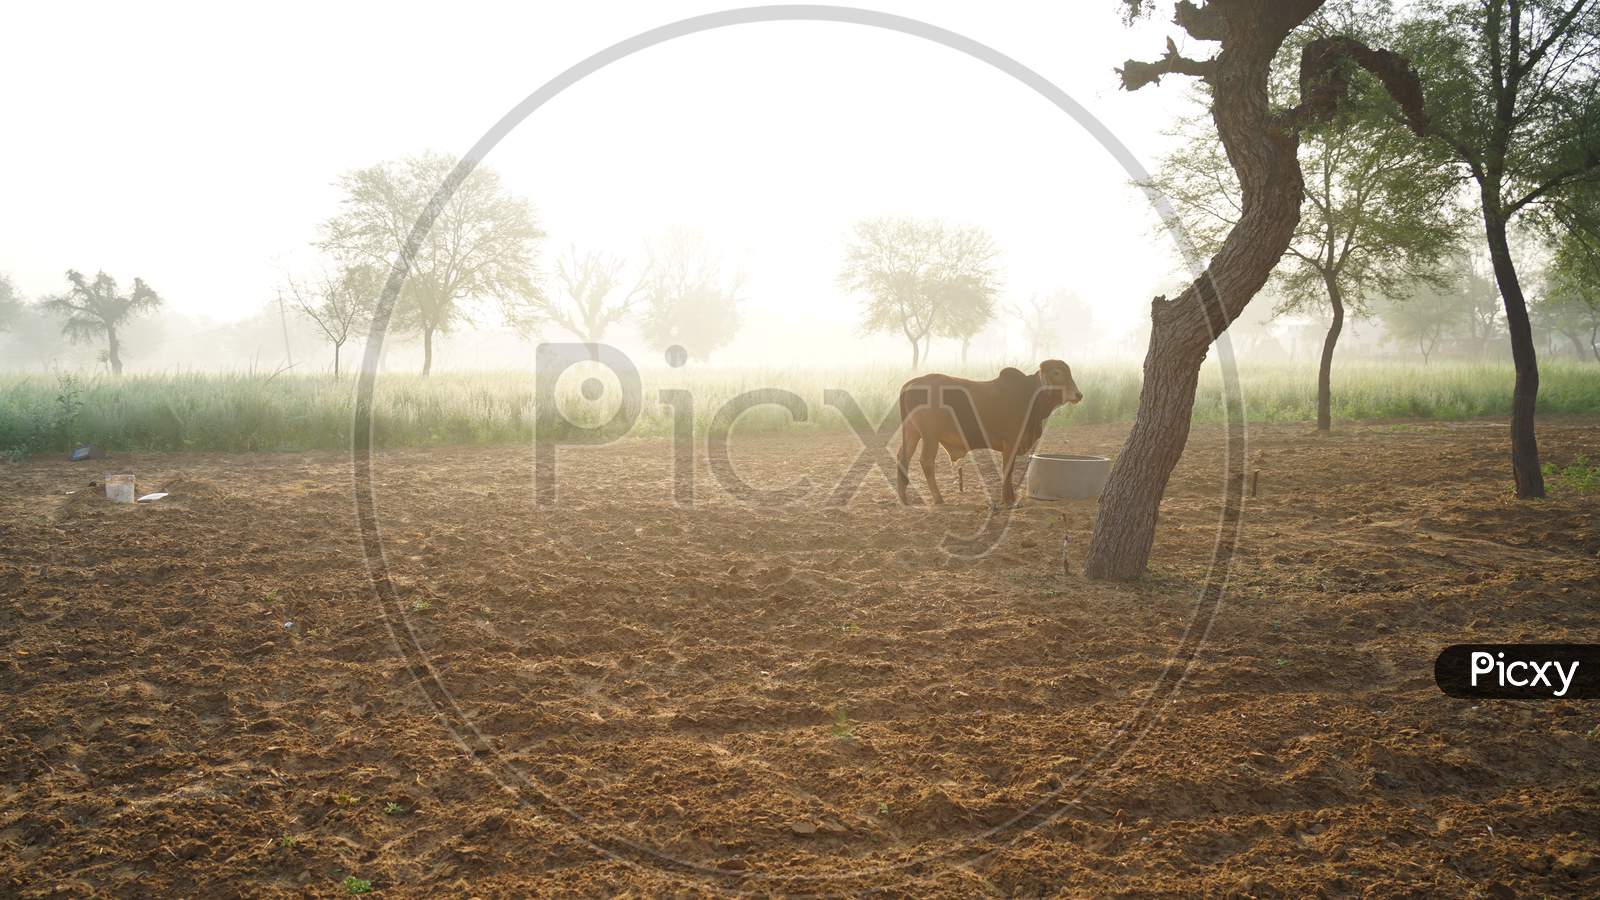 Brown Gir Indian Bull Closeup Shot In A Field With Winter Foggy Morning. Pets Animal Concept.